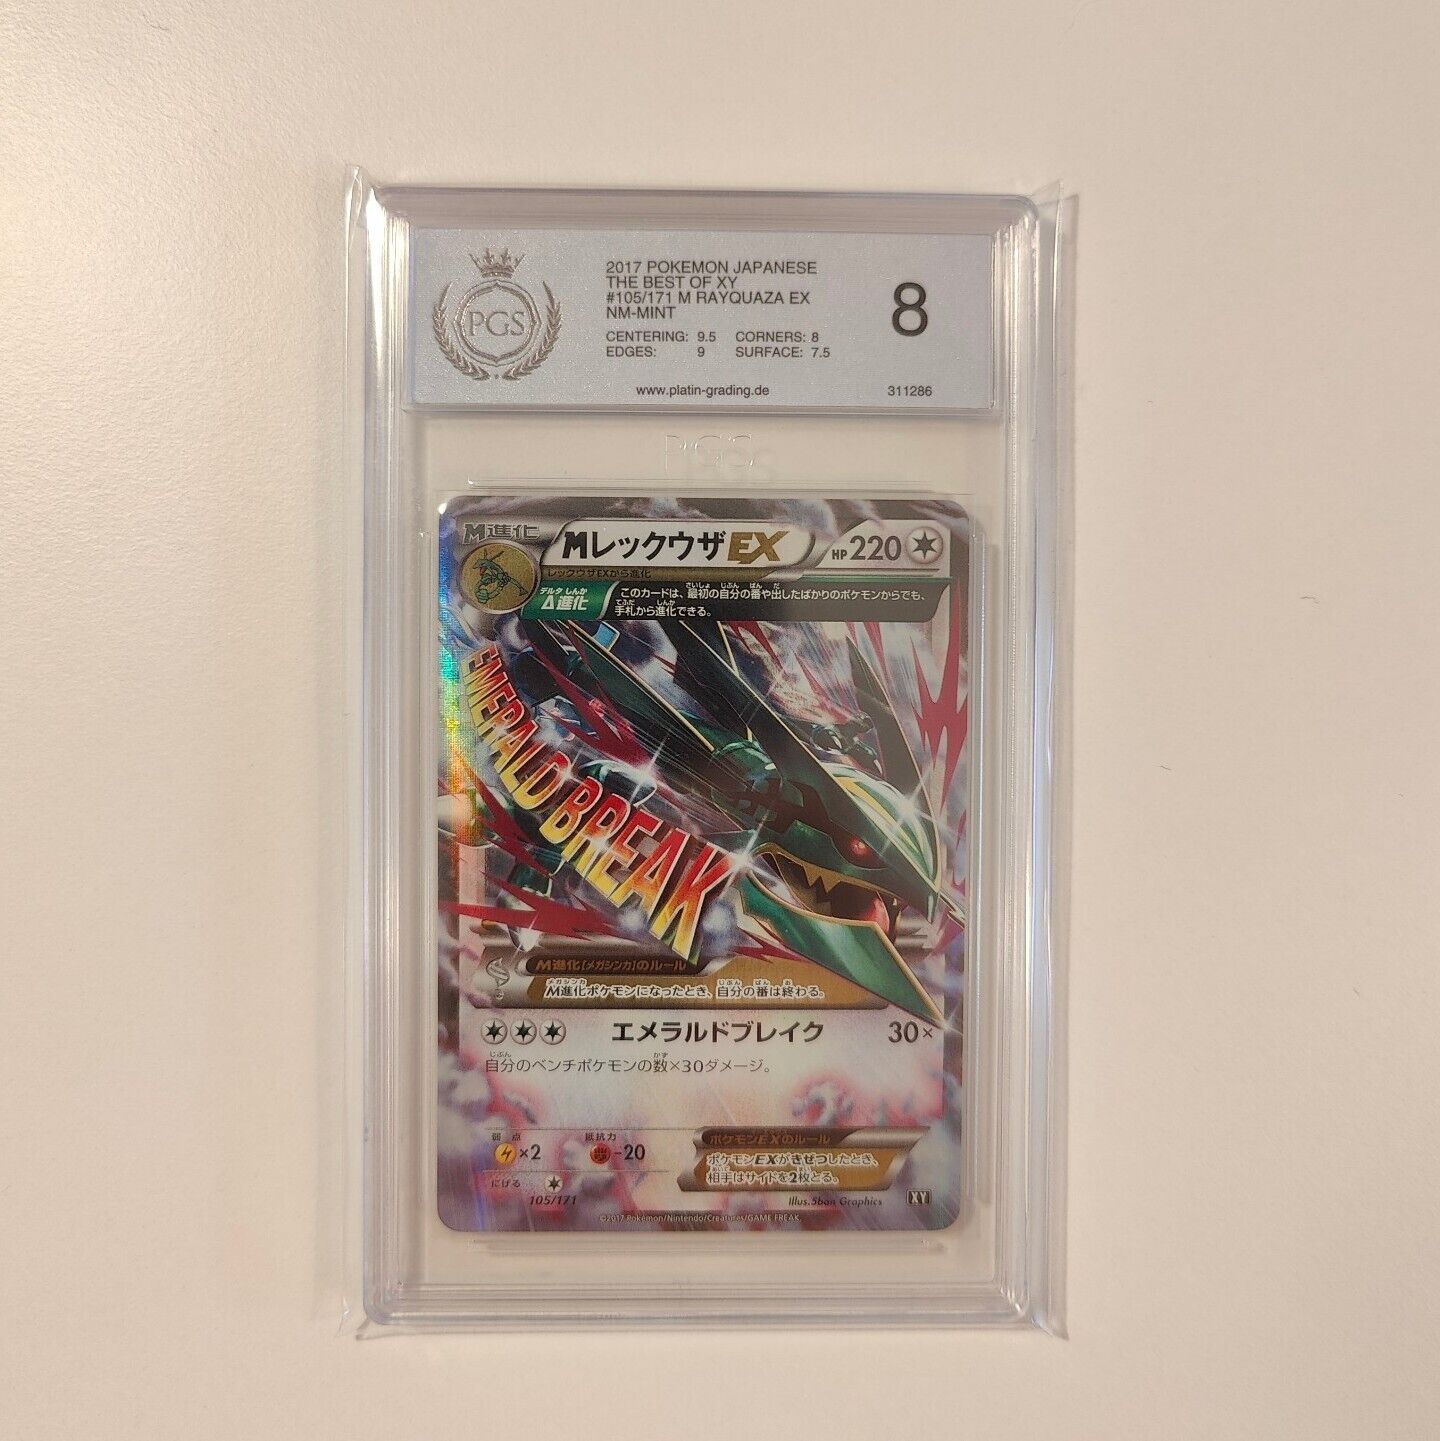 M Rayquaza EX - PGS 8 - 2017 - The Best of XY - 105/171 - NM-Mint - Japanese